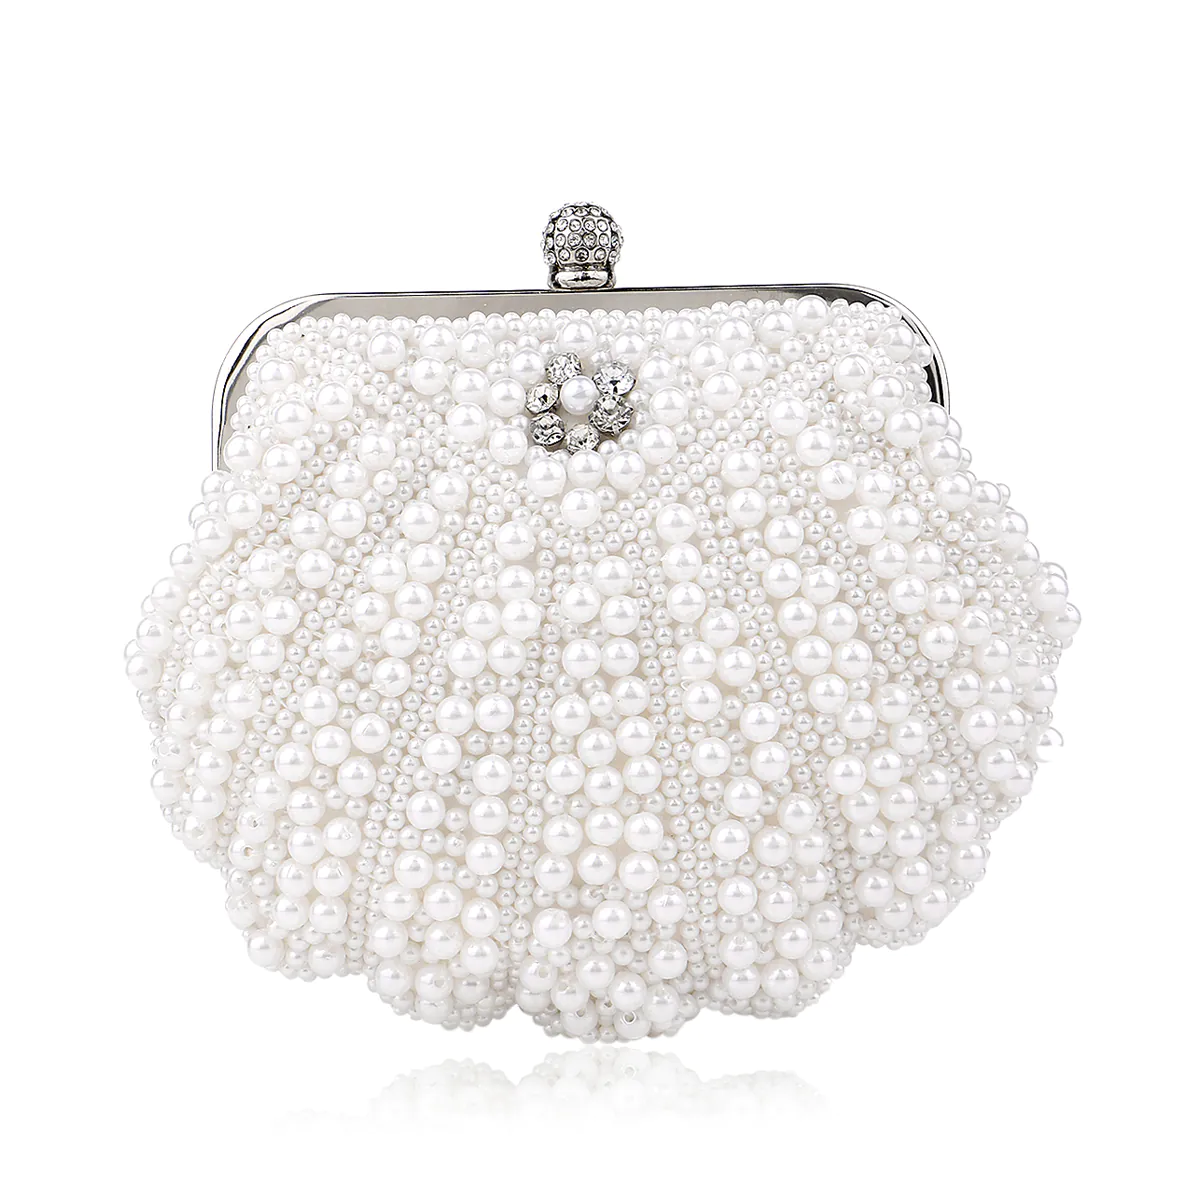 Pearl Crossbody Bag Handbag for Party Date Formal Occasion01